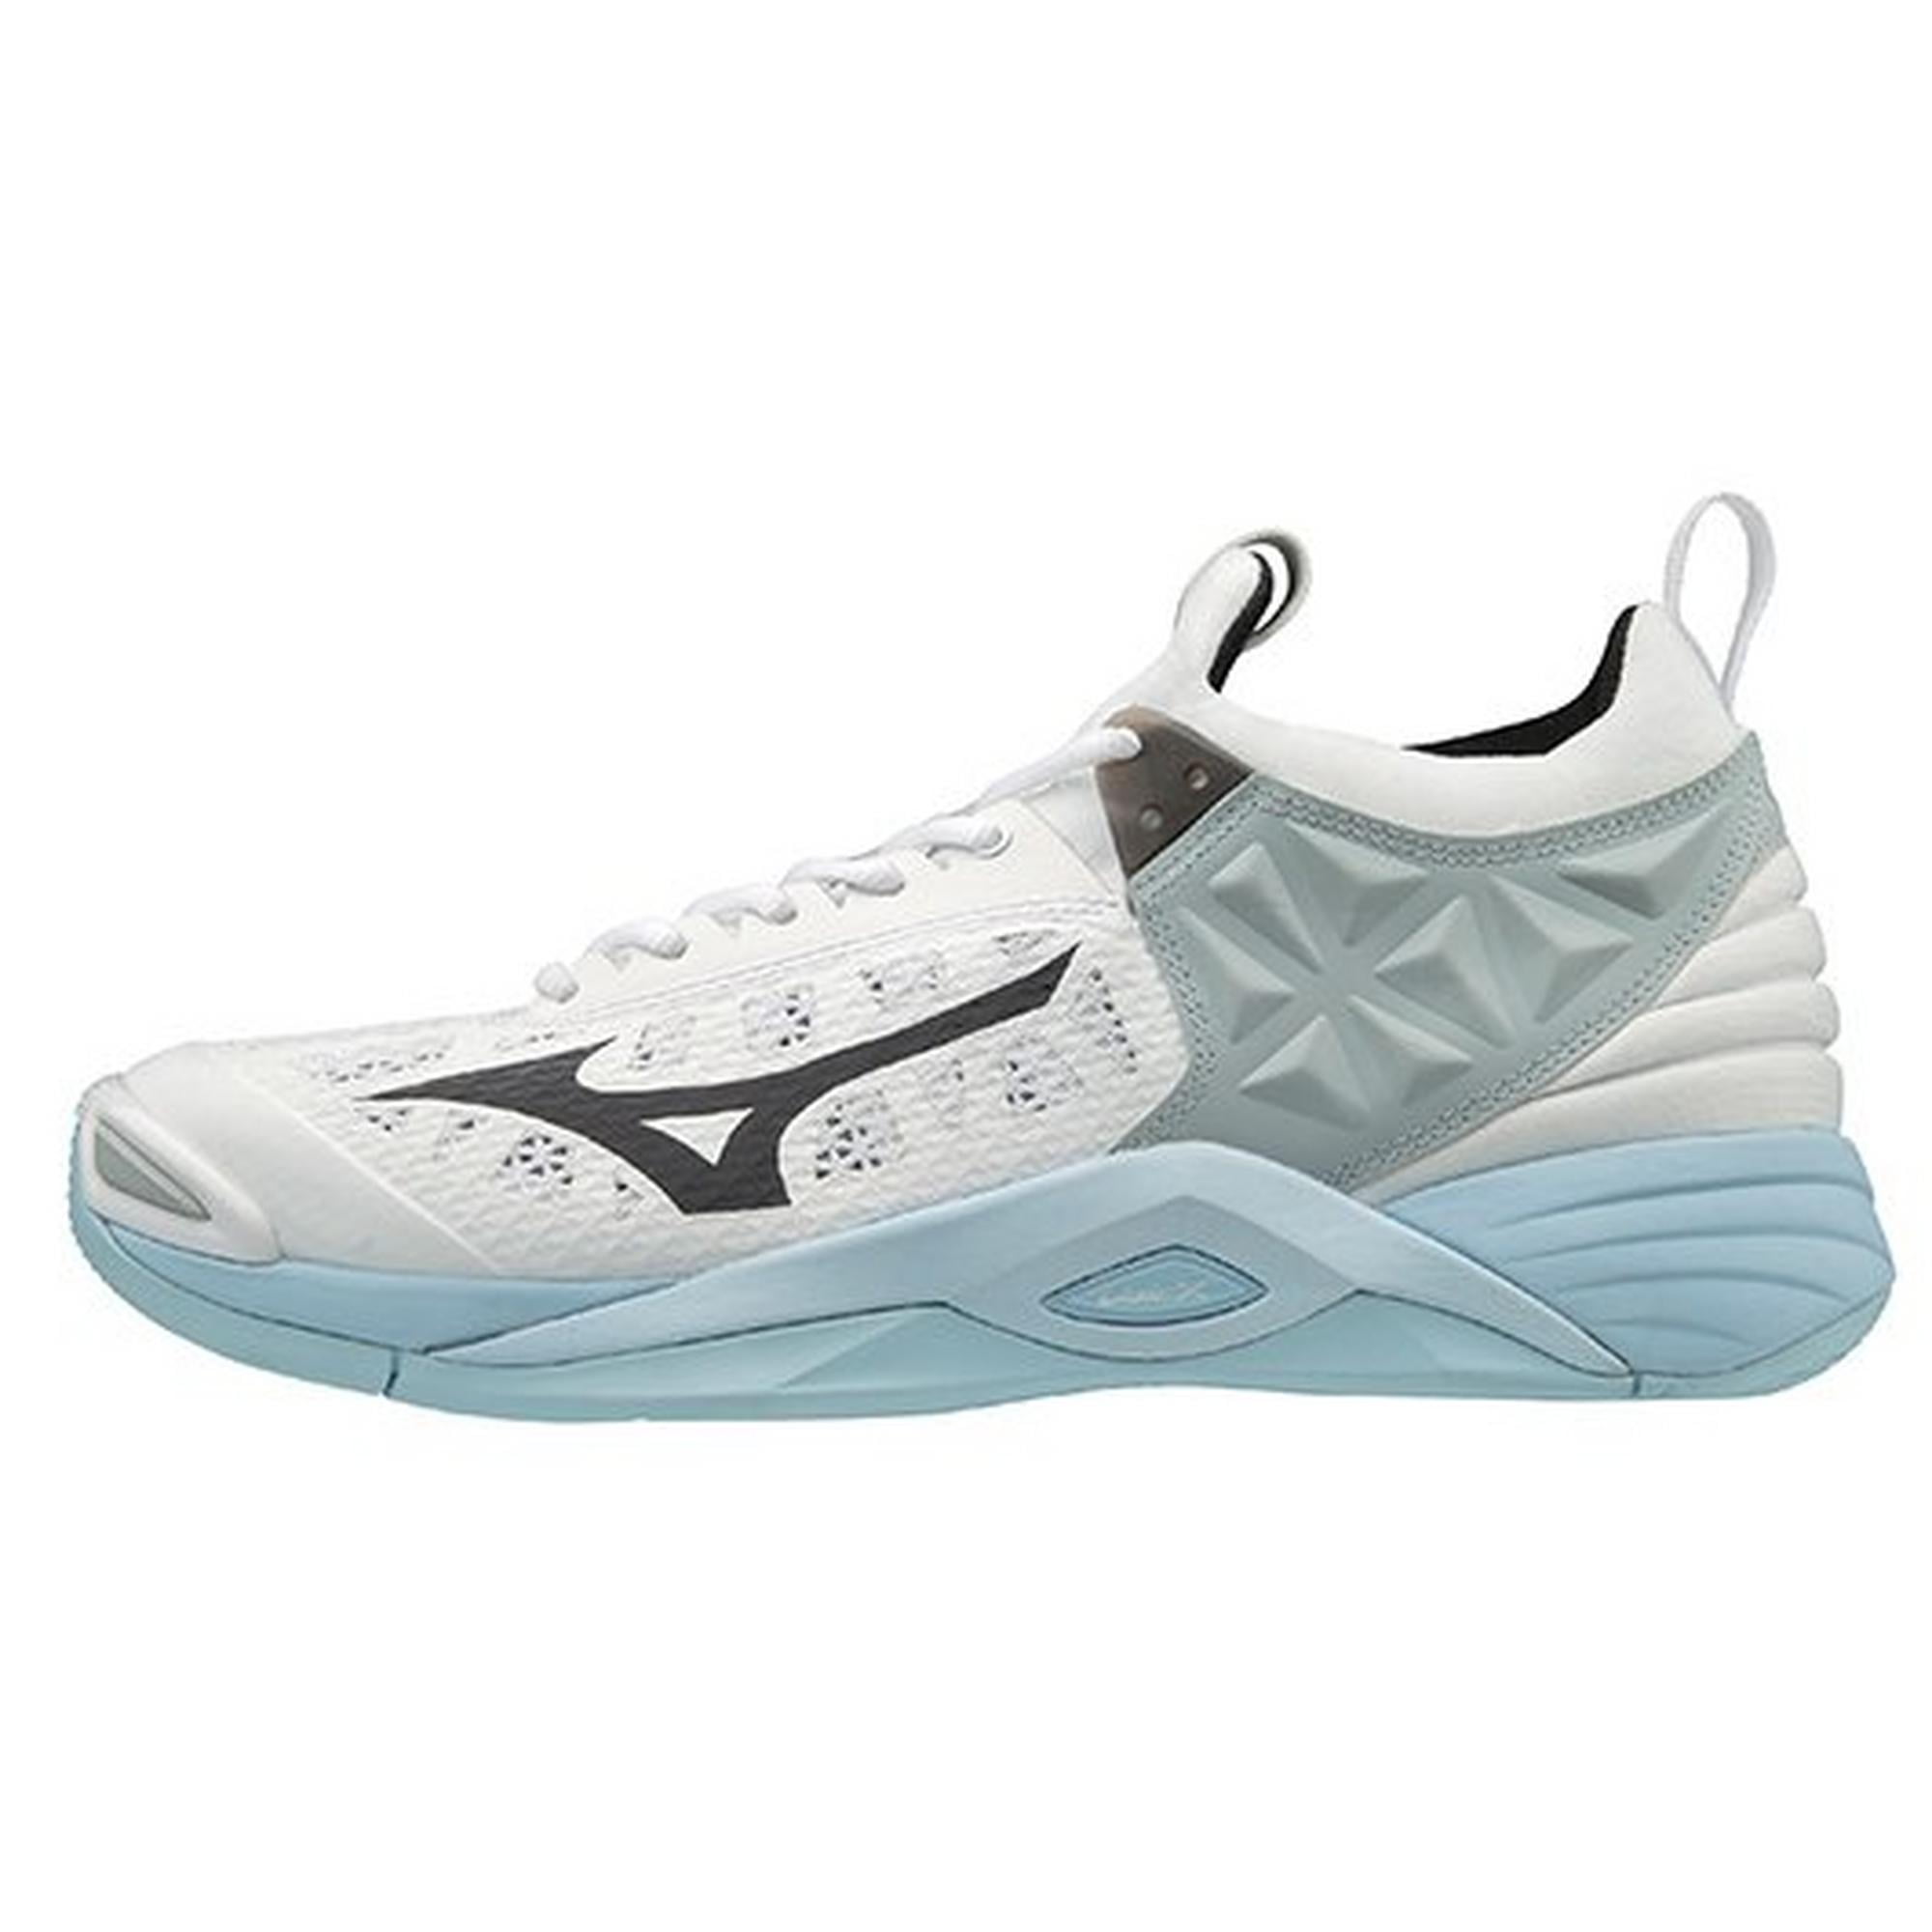 Best Volleyball Shoes For Liberos | diocesesa.org.br